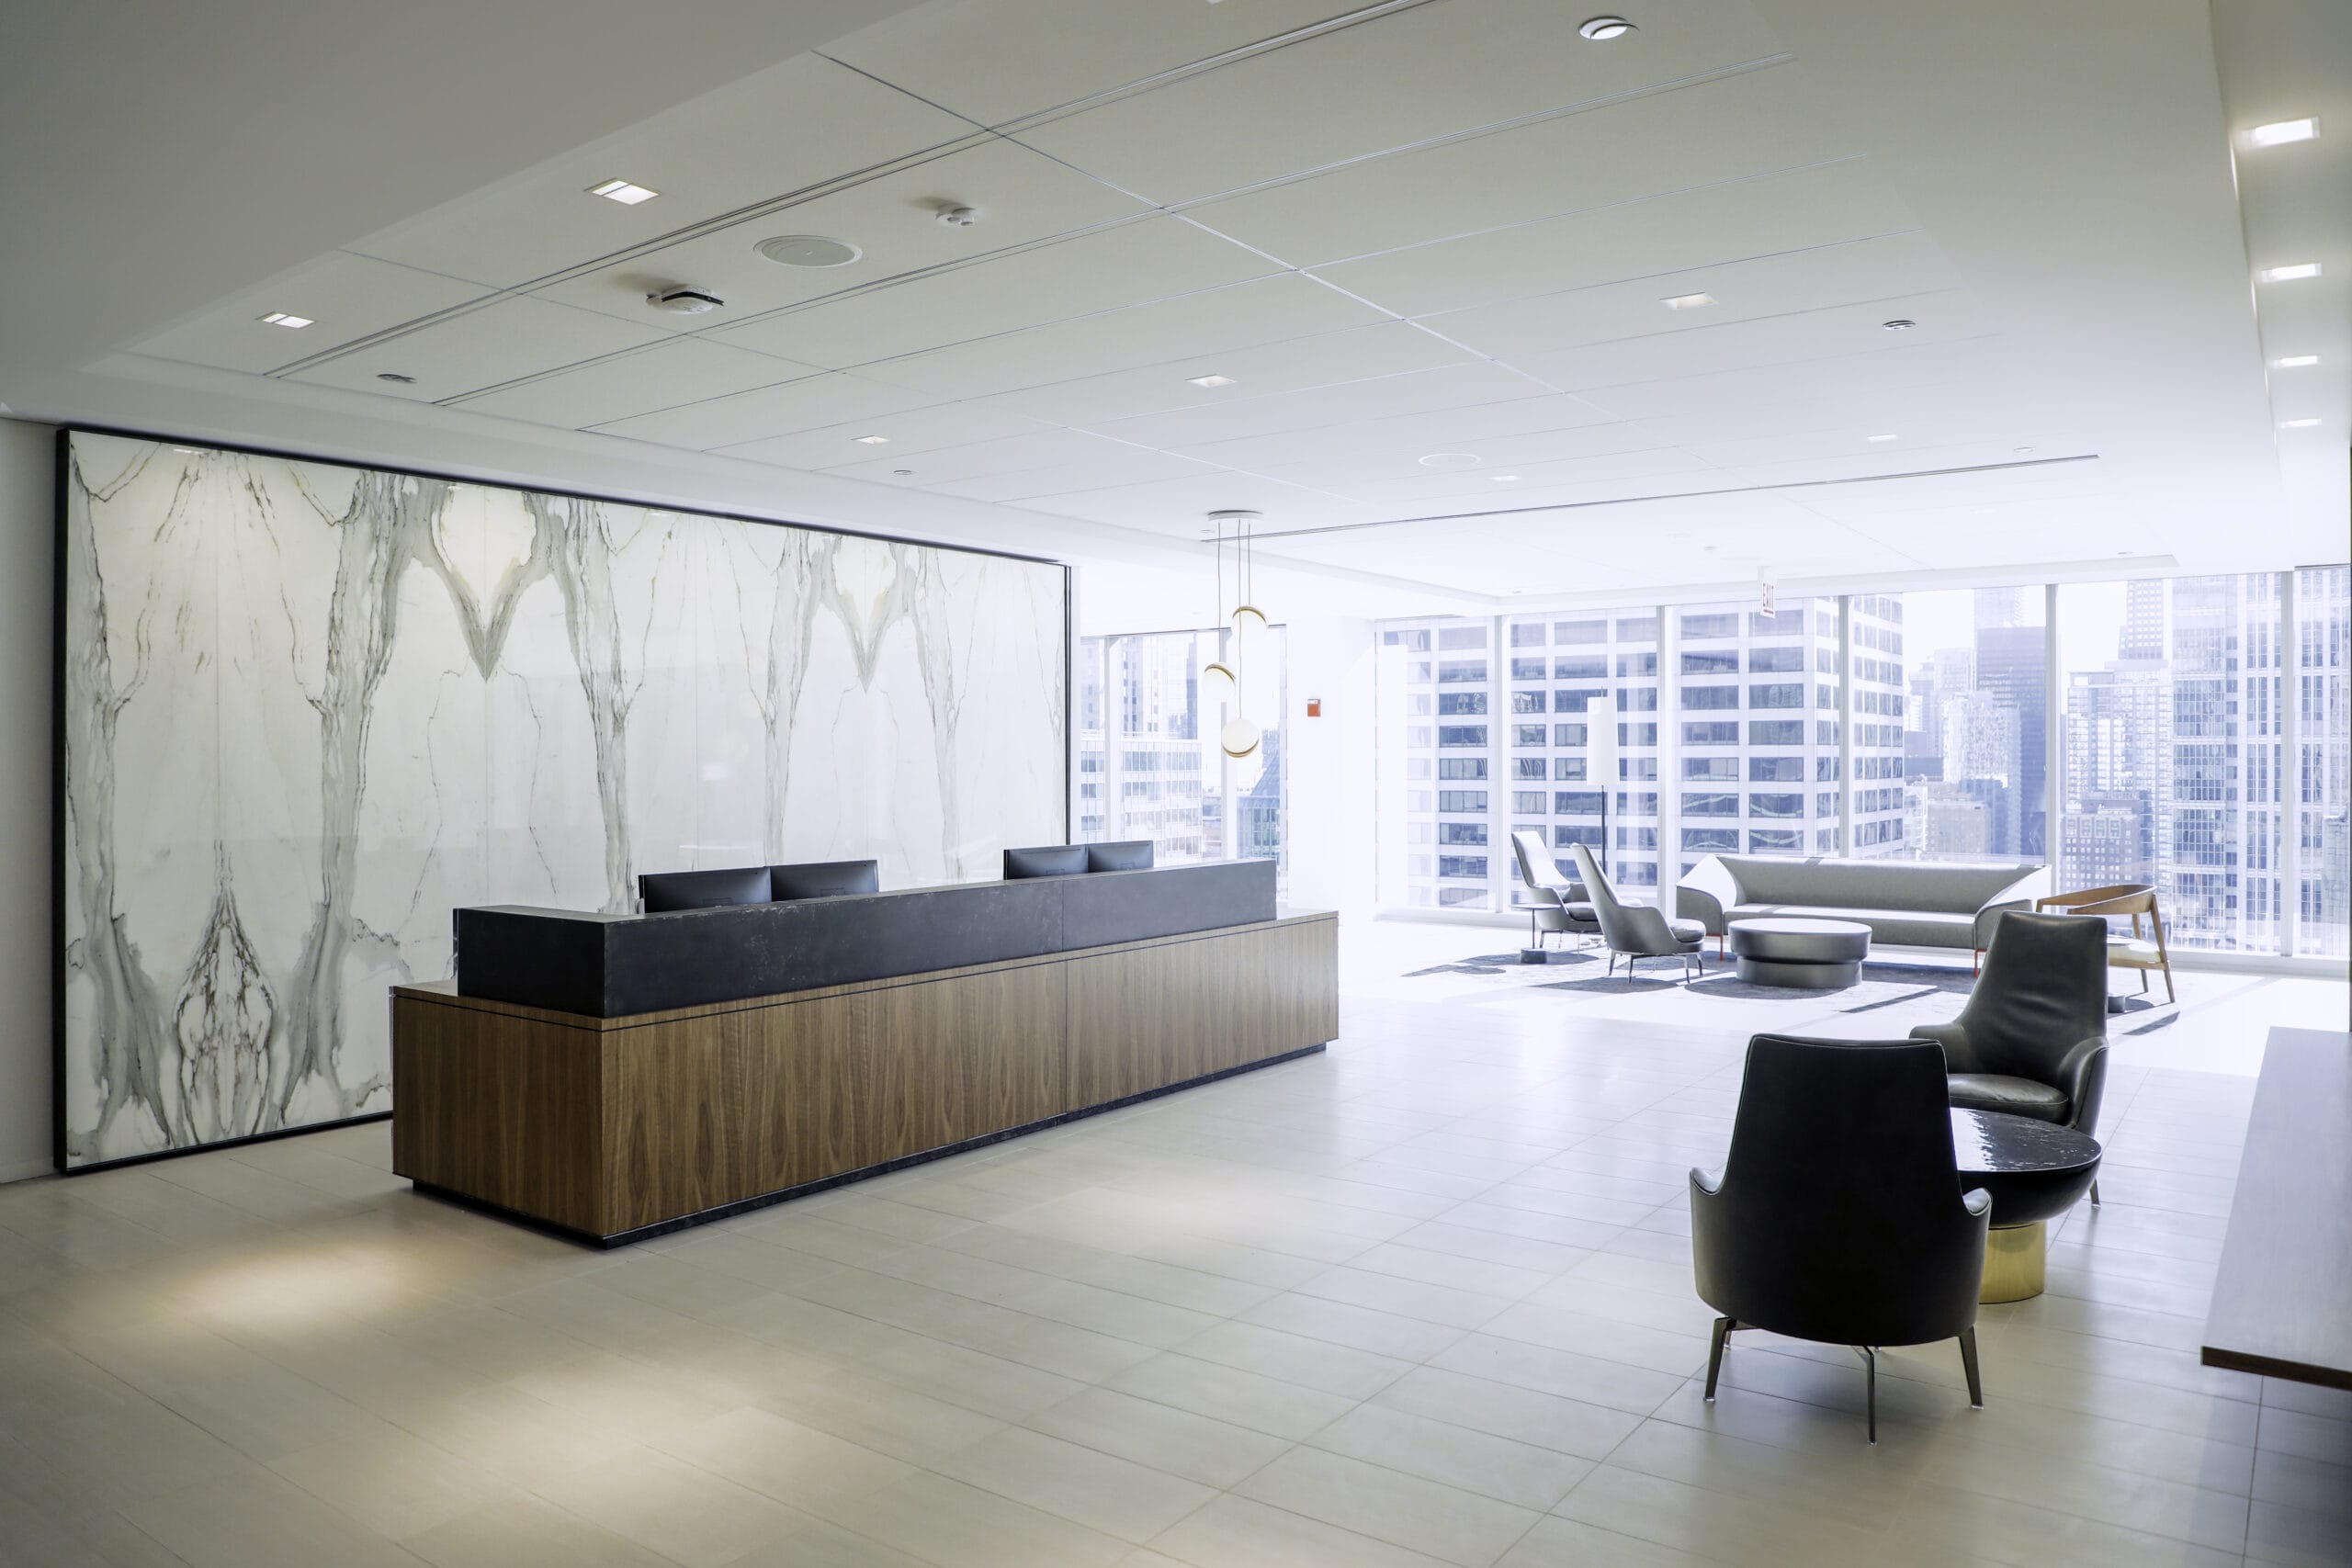 Skender Completes Interior Construction of National Law Firm’s 121,000-Square-Foot Headquarters in Chicago